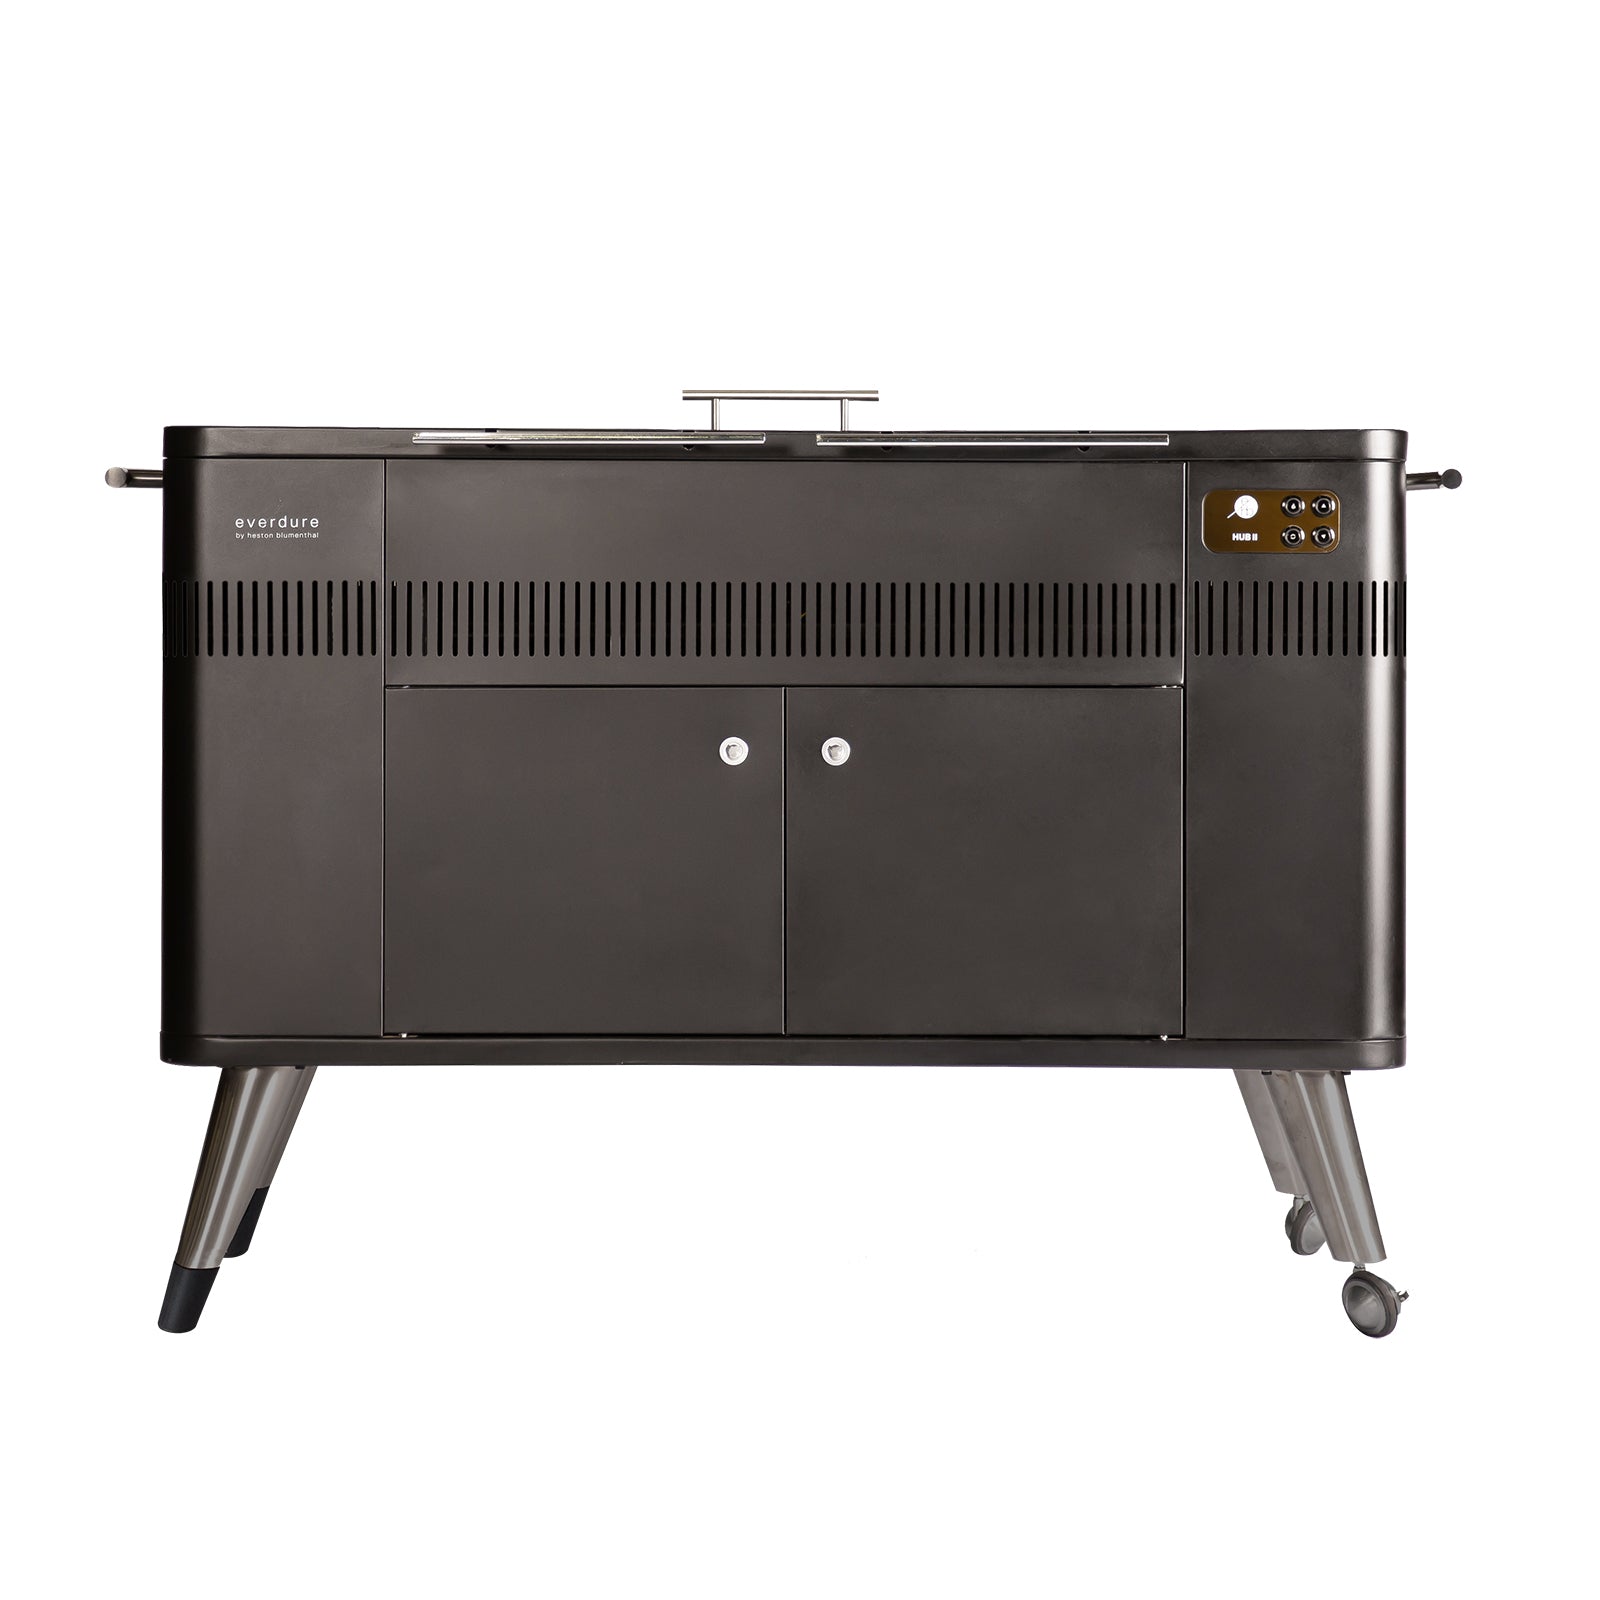 Everdure HUB II Electric Ignition Charcoal Barbeque